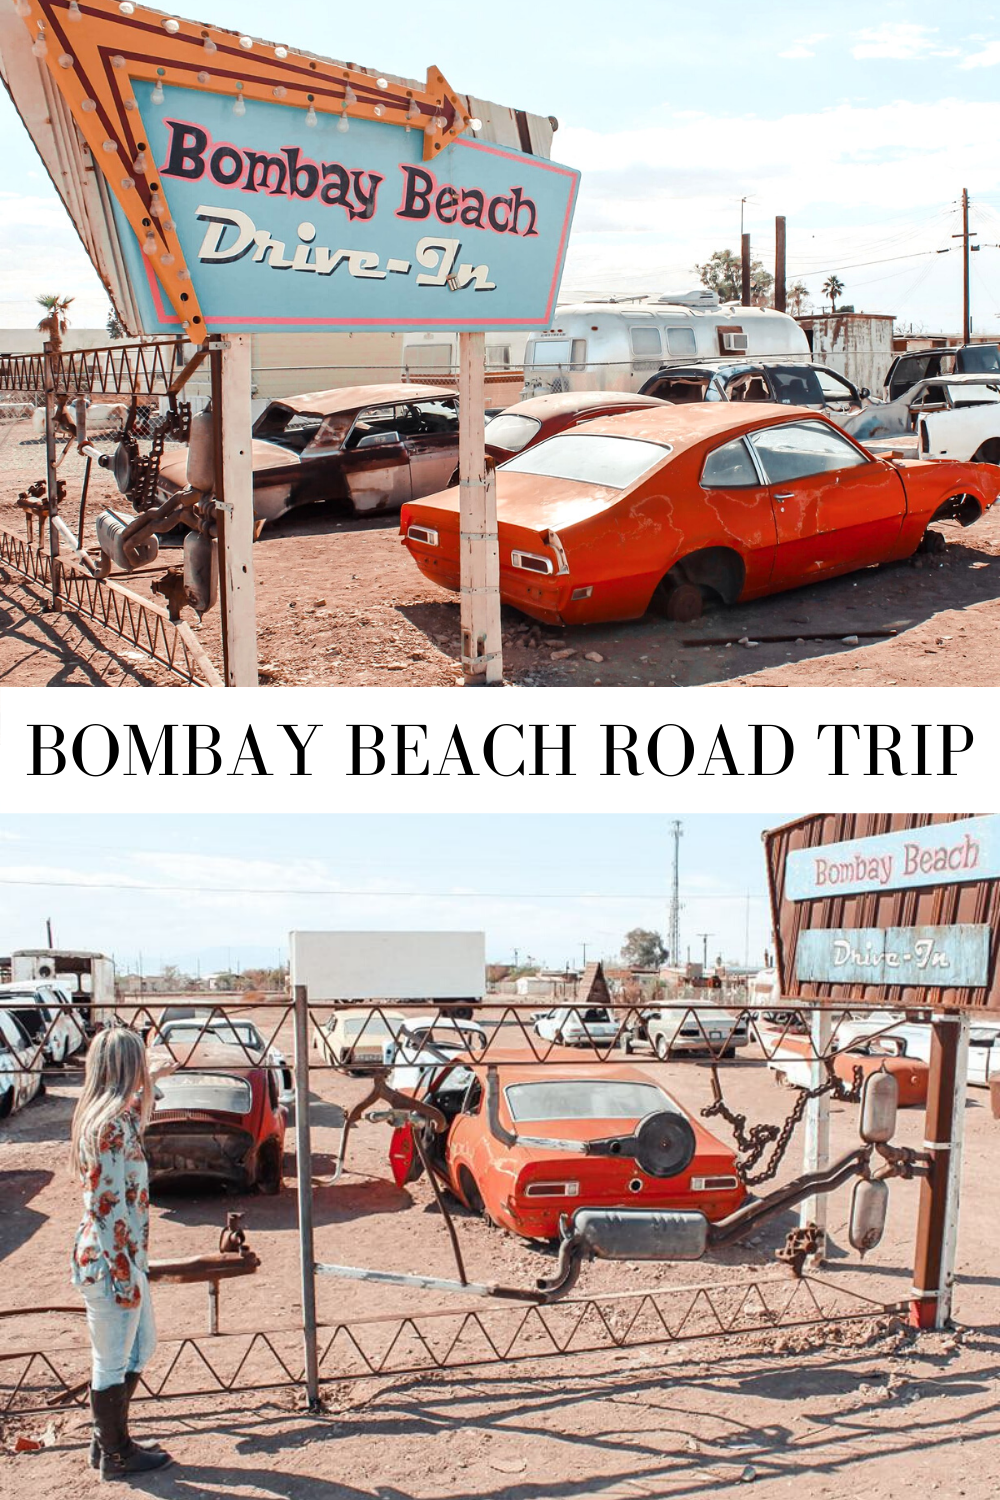 Bombay Beach: Photo's to Inspire A Road Trip